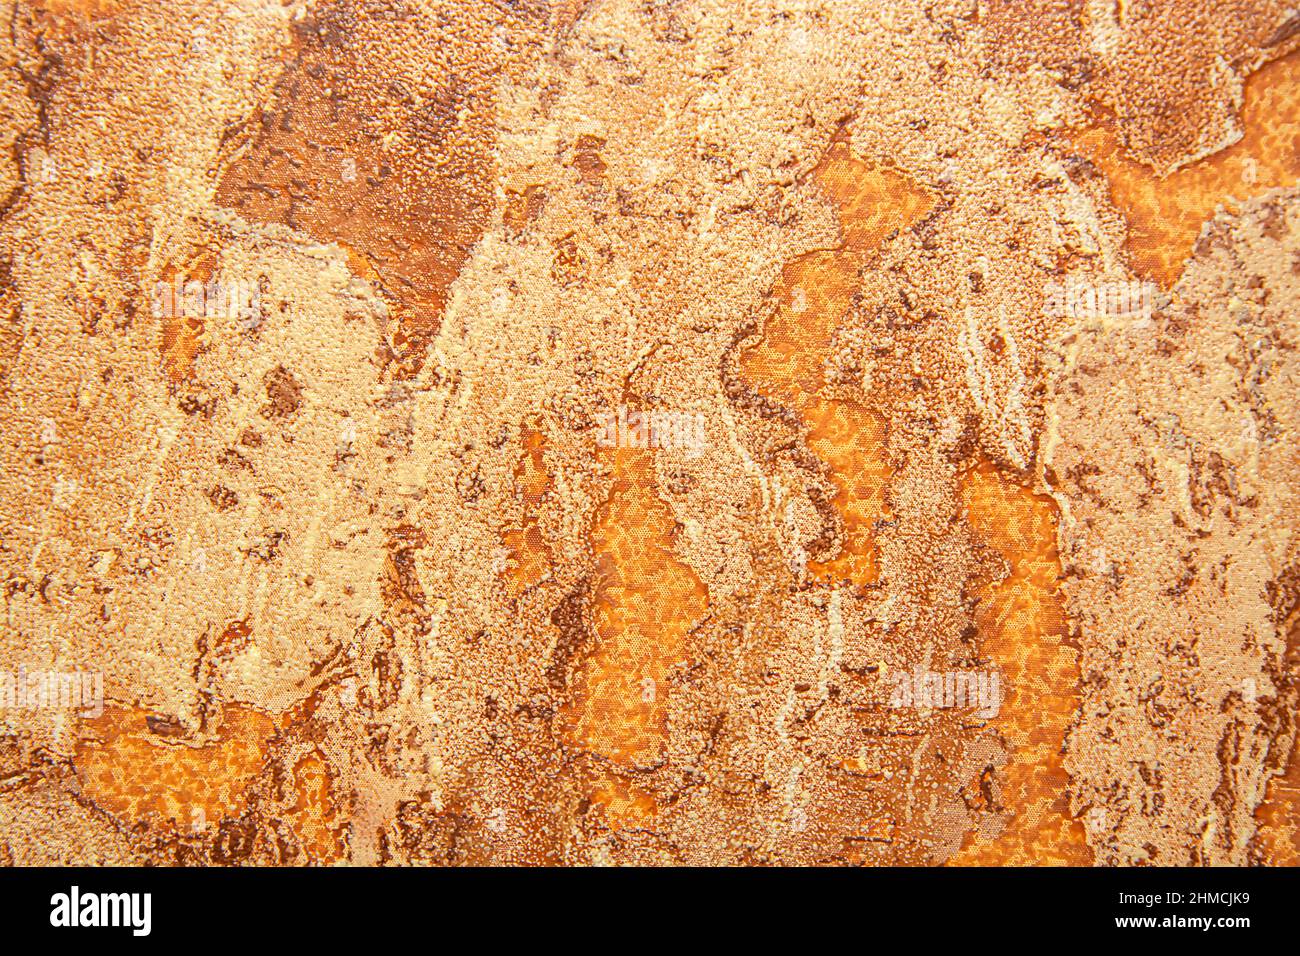 Abstract background texture of cork material in beige shades. Stock Photo